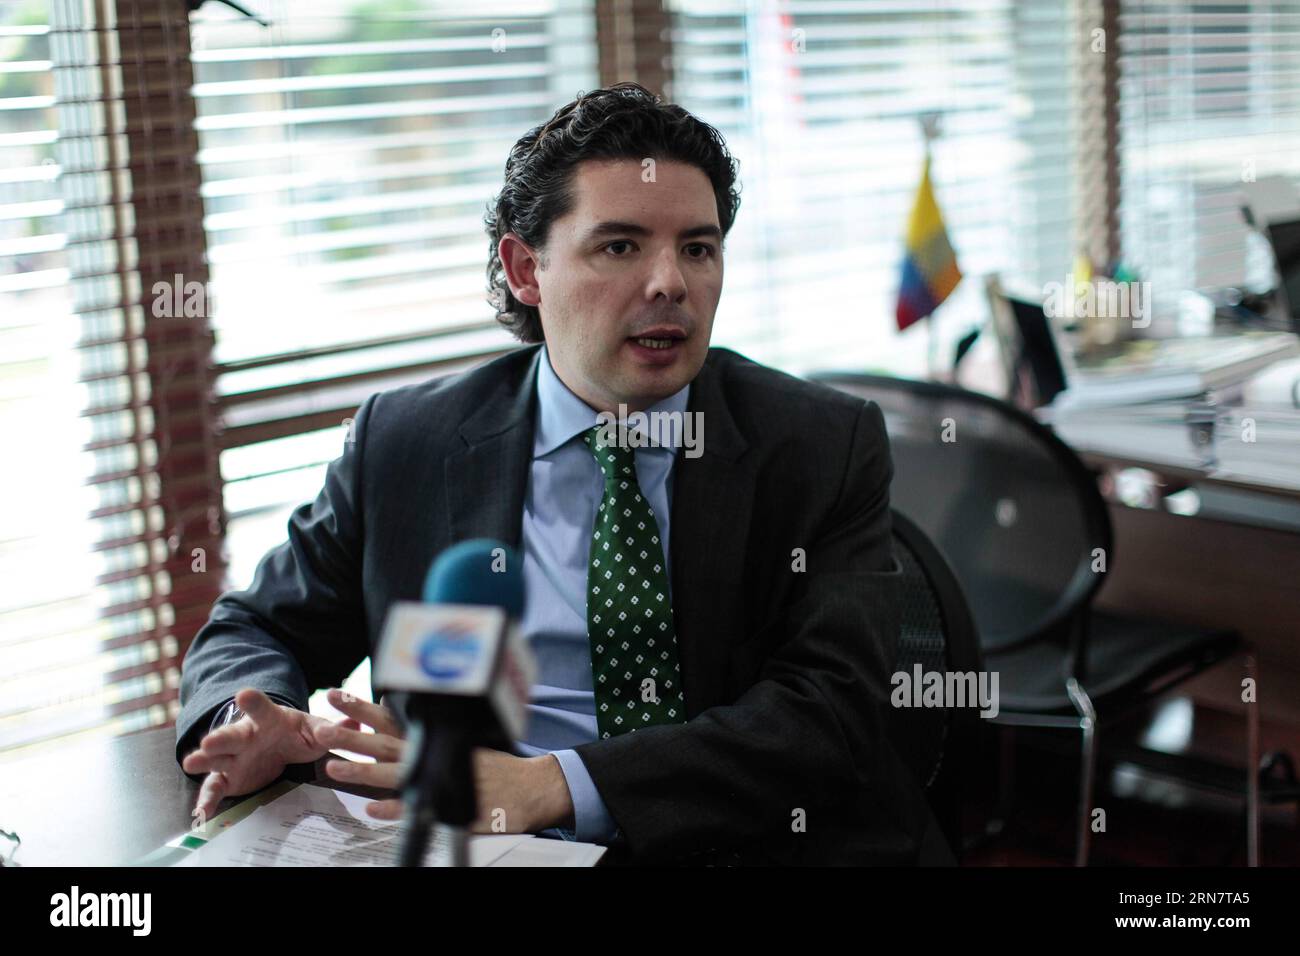 Photo taken on Sept. 17, 2015 shows Colombian deputy Defense Minister for International Politics and Affairs Anibal Fernandez de Soto receiving an interview with Xinhua News Agency in Bogota city, capital of Colombia. Colombian Government began to take measures against the increase in several regions of the country of illegal mining, that is developed specially by the guerrillas and criminal bands that exploit the mineral resources of the country irregularly and are leaving severe damages to the environment. Anibal Fernandez de Soto explained that the irregular groups have found more earnings Stock Photo